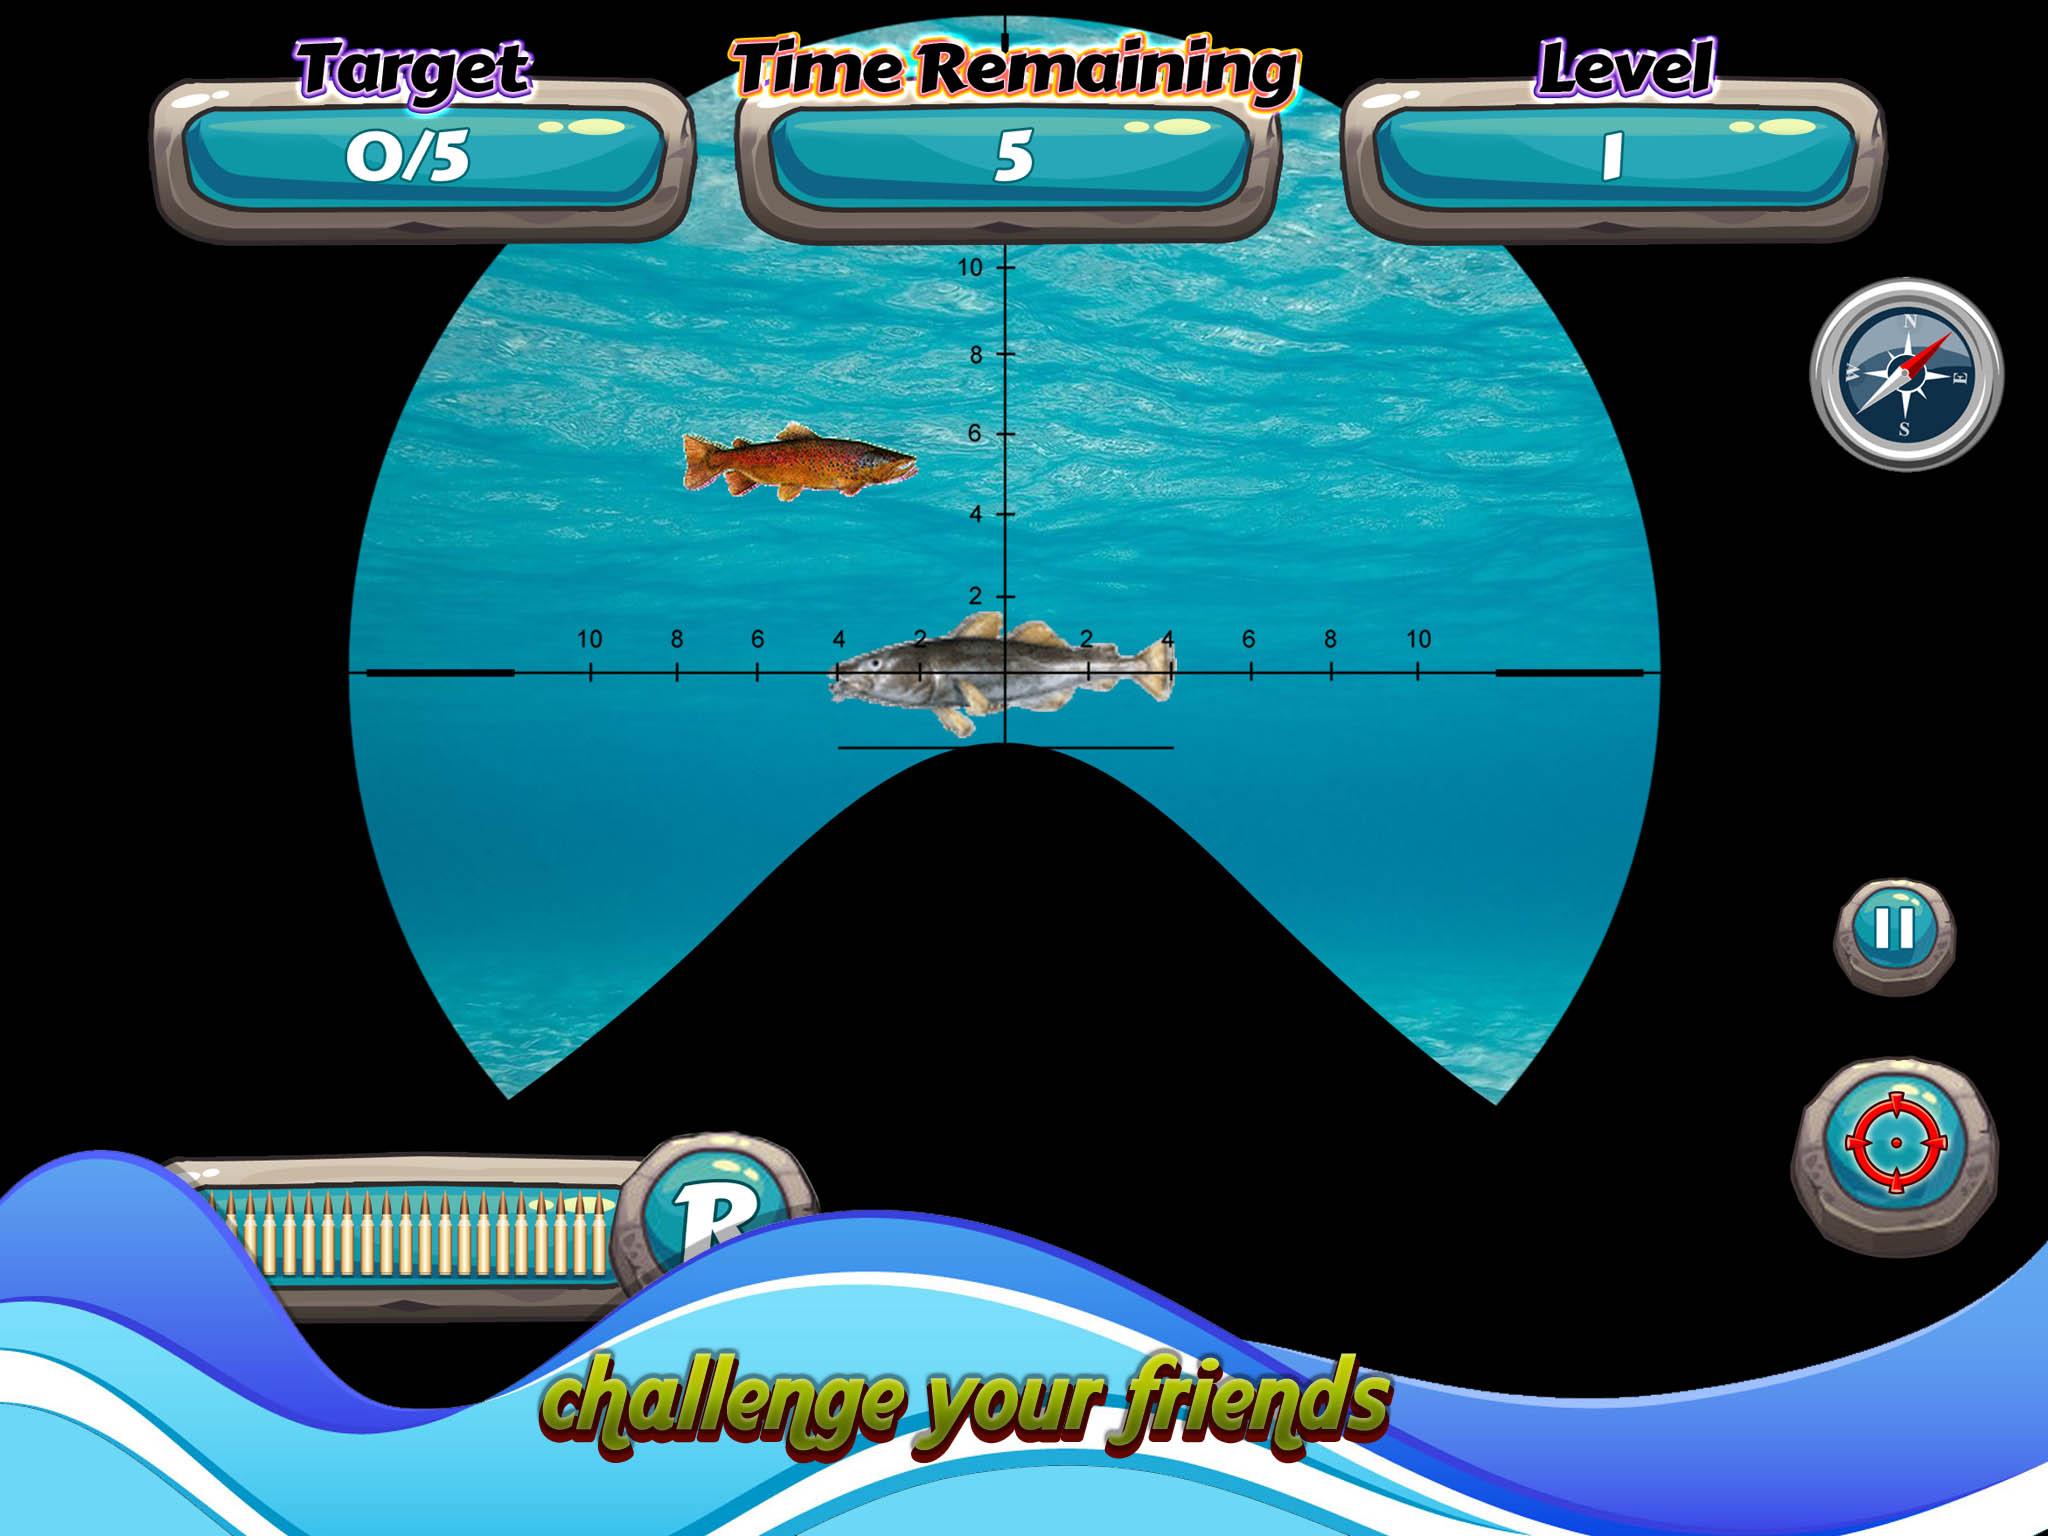 Great Shark Hunting for Android - APK Download - 